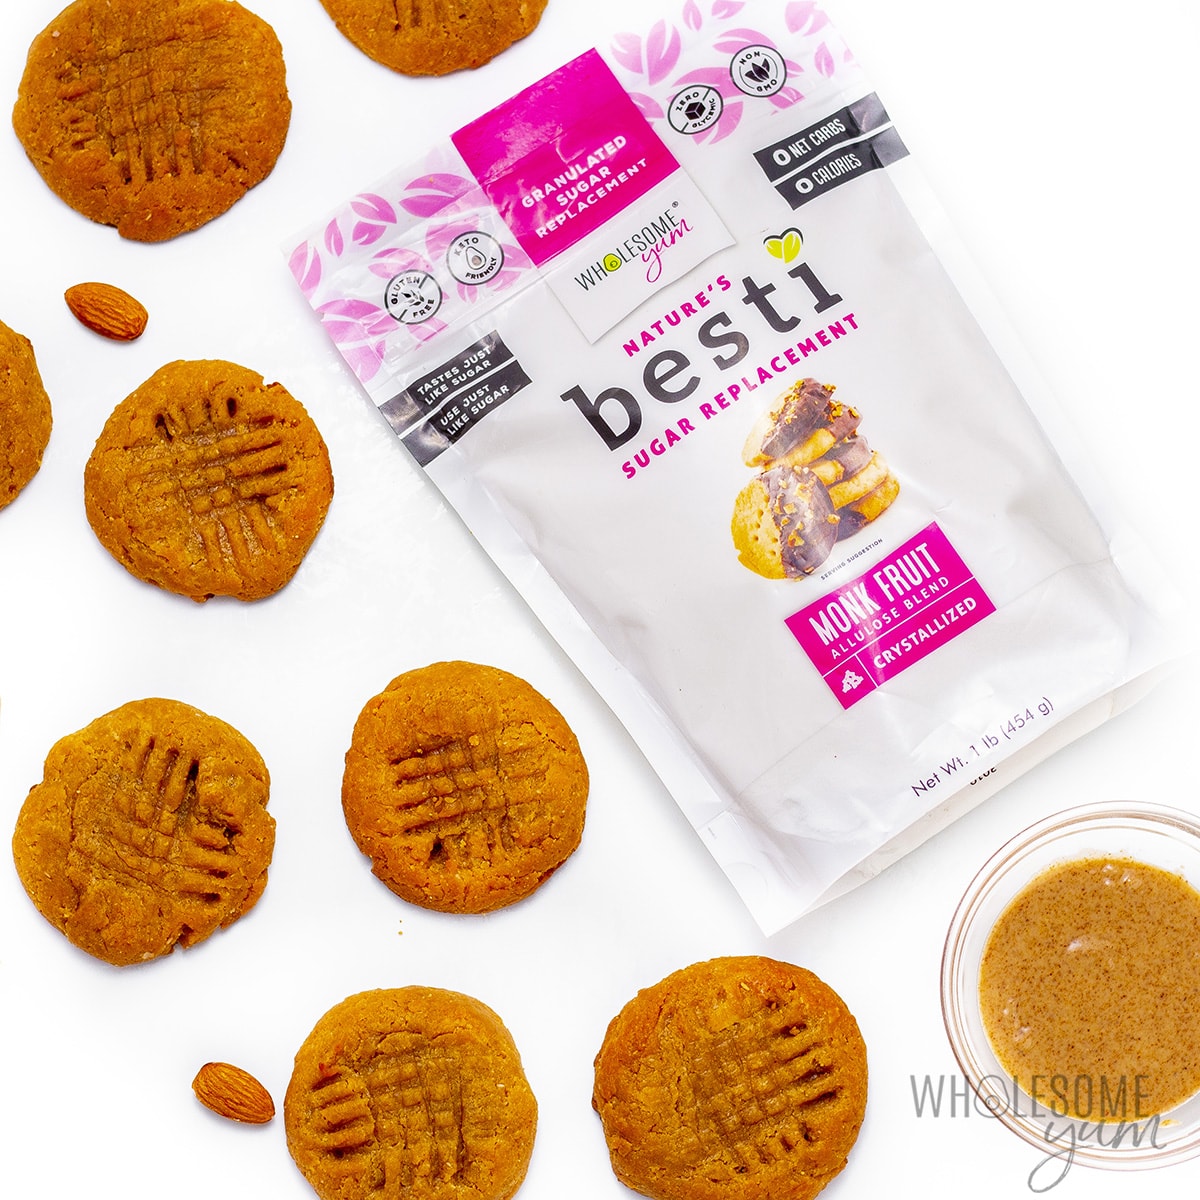 Almond butter cookies around Besti Monk Fruit Allulose Blend, a sweetener to keep net carbs on keto low.